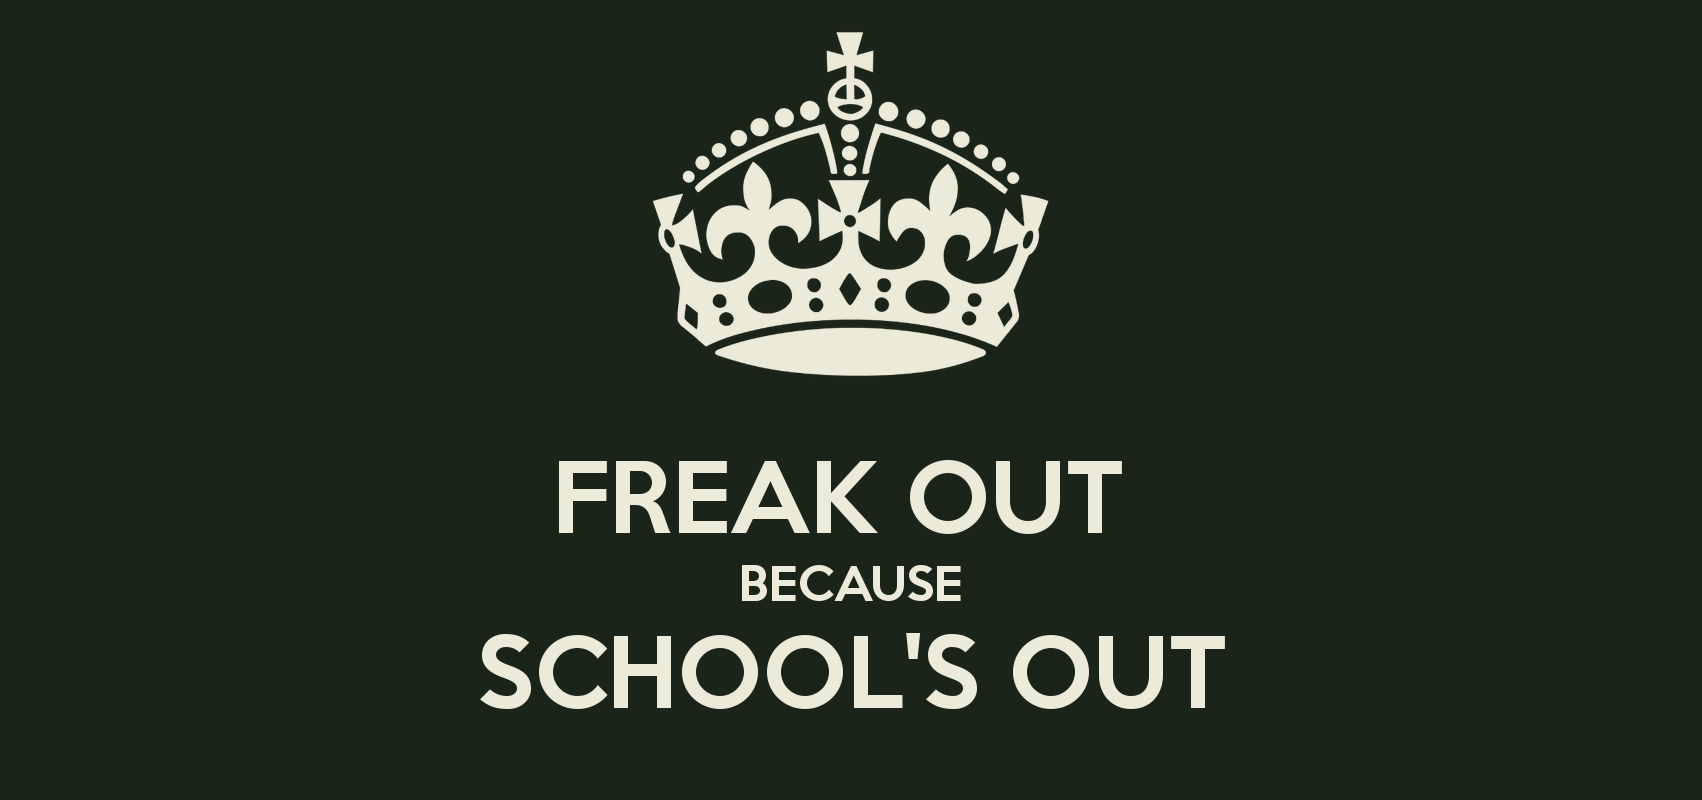 Freak Out Because School S Keep Calm And Carry On Image